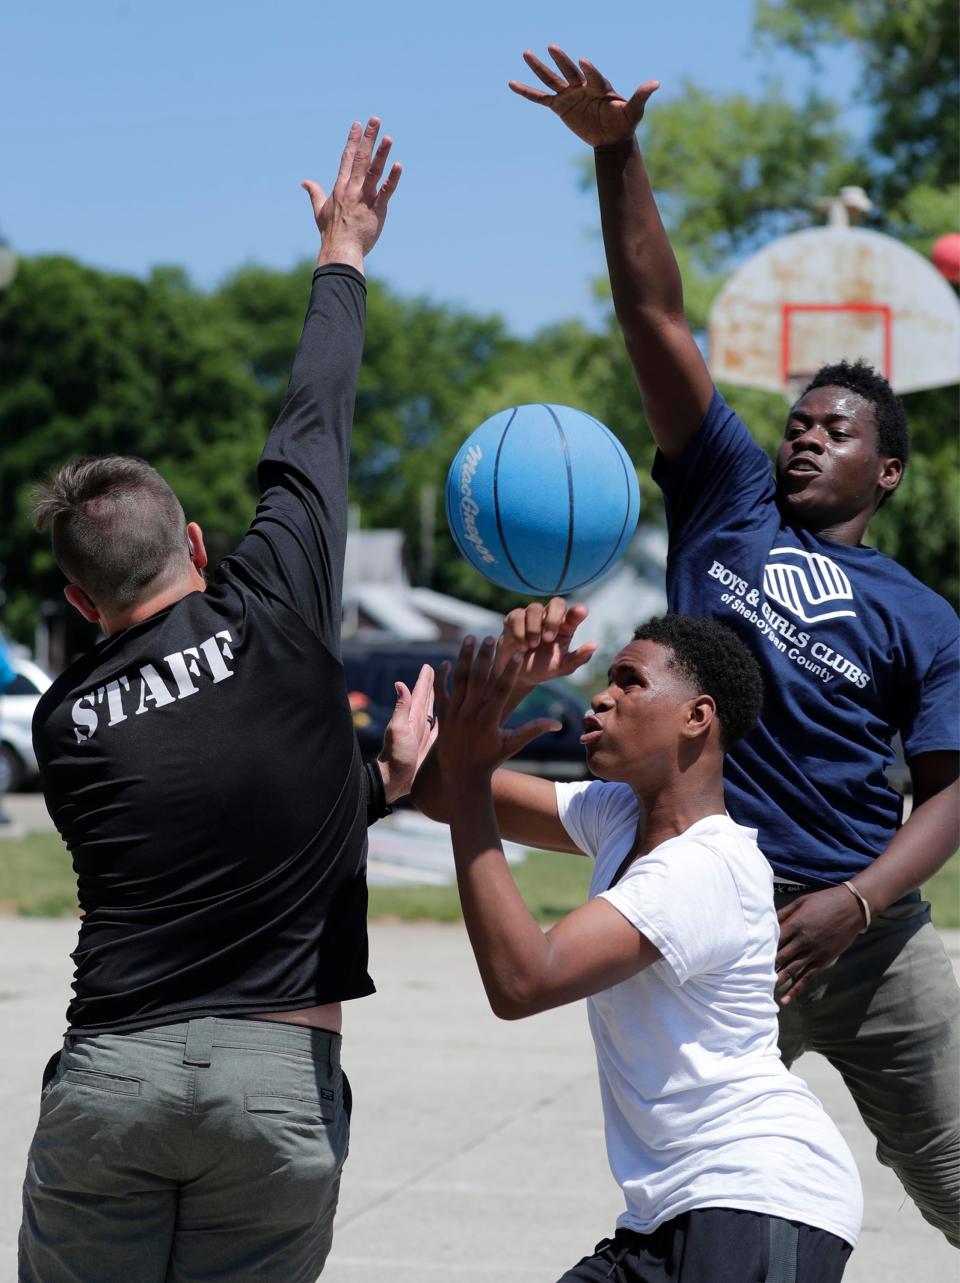 Boys and Girls Club's Andrew Jakus, left, tries to block Travionte Coleman, 14, of Milwaukee, make a shot by Jalen Robinson, of Sheboygan, Saturday, June 19, 2021.